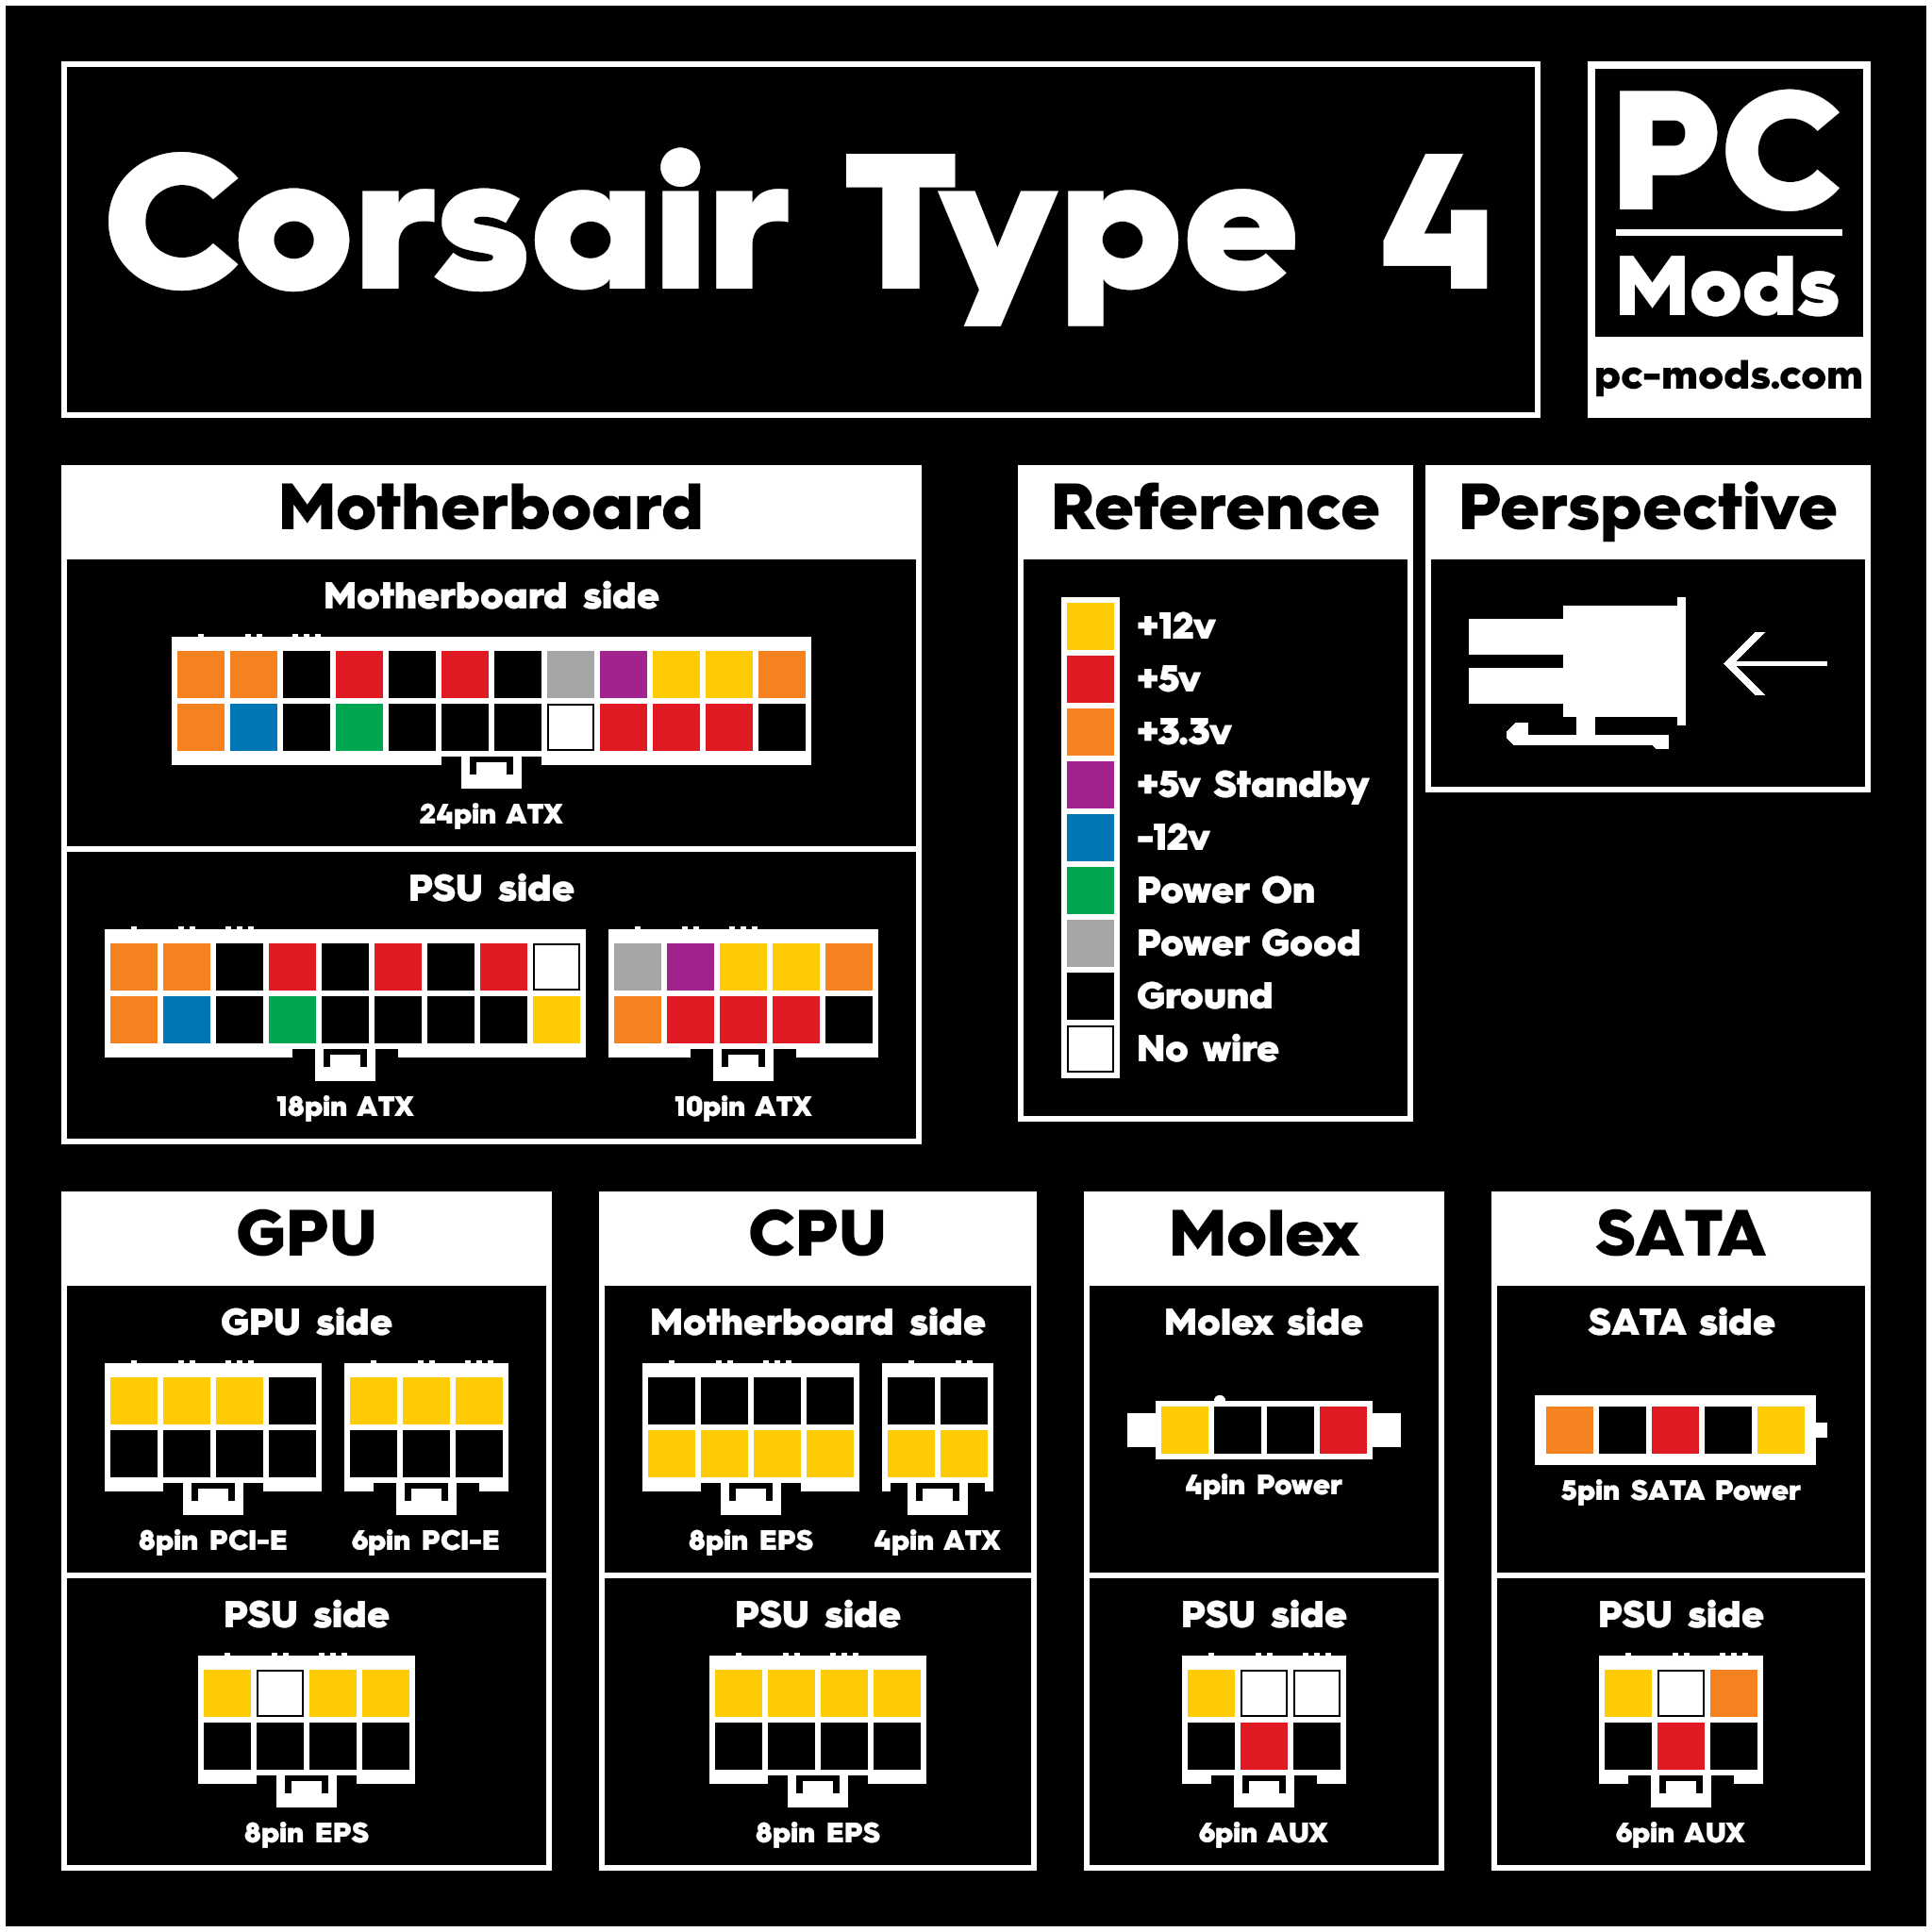 https://linustechtips.com/uploads/monthly_2020_11/PSU_Pinout_Voltage_-_Corsair_Type_4.png.452e19ae65c48092ada1a853bcebdf2d.png